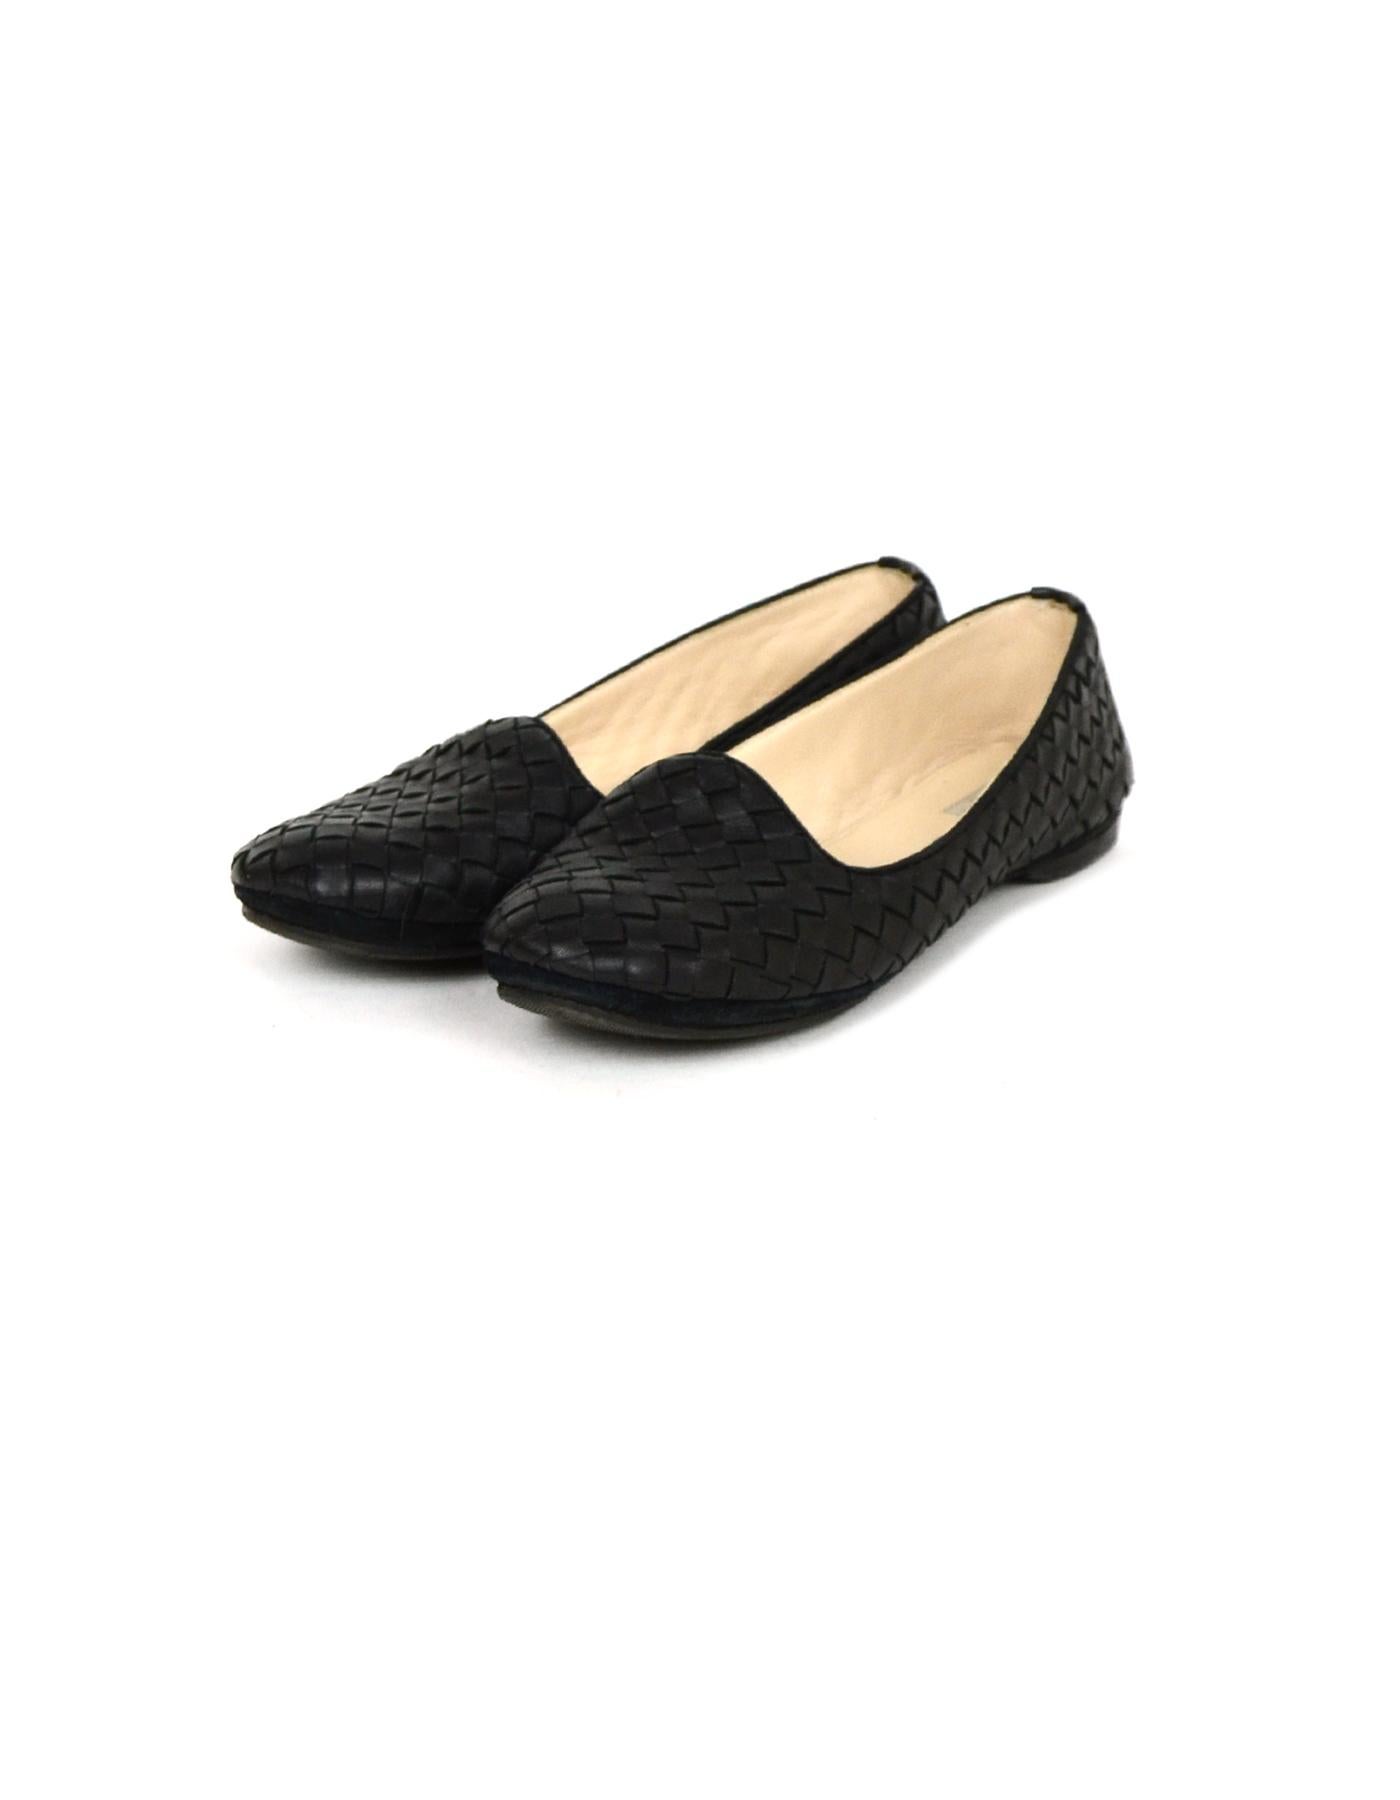 Bottega Veneta Black Intrecciato Woven Leather Loafers sz 36.5

Made In: Italy
Color: Black 
Materials: Leather
Closure/Opening: Slip on
Overall Condition: Excellent pre-owned condition, with the exception of light wear on interior and